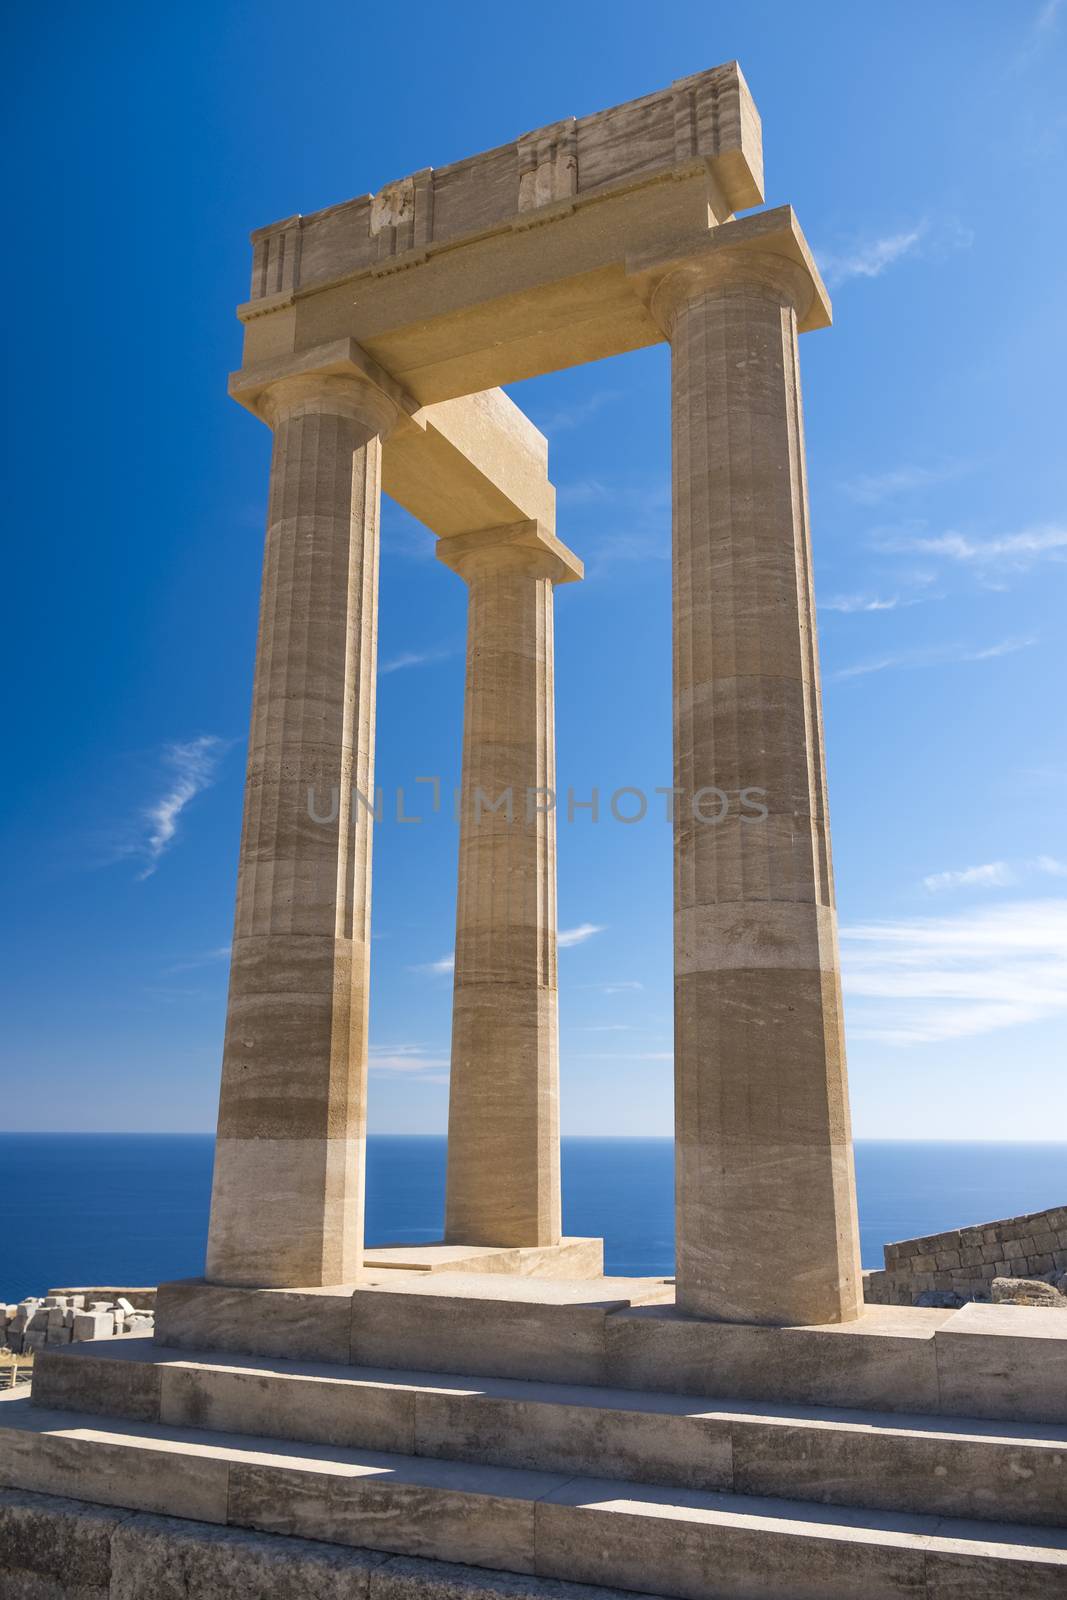  Acropolis of Lindos on Rhodes island in Greece